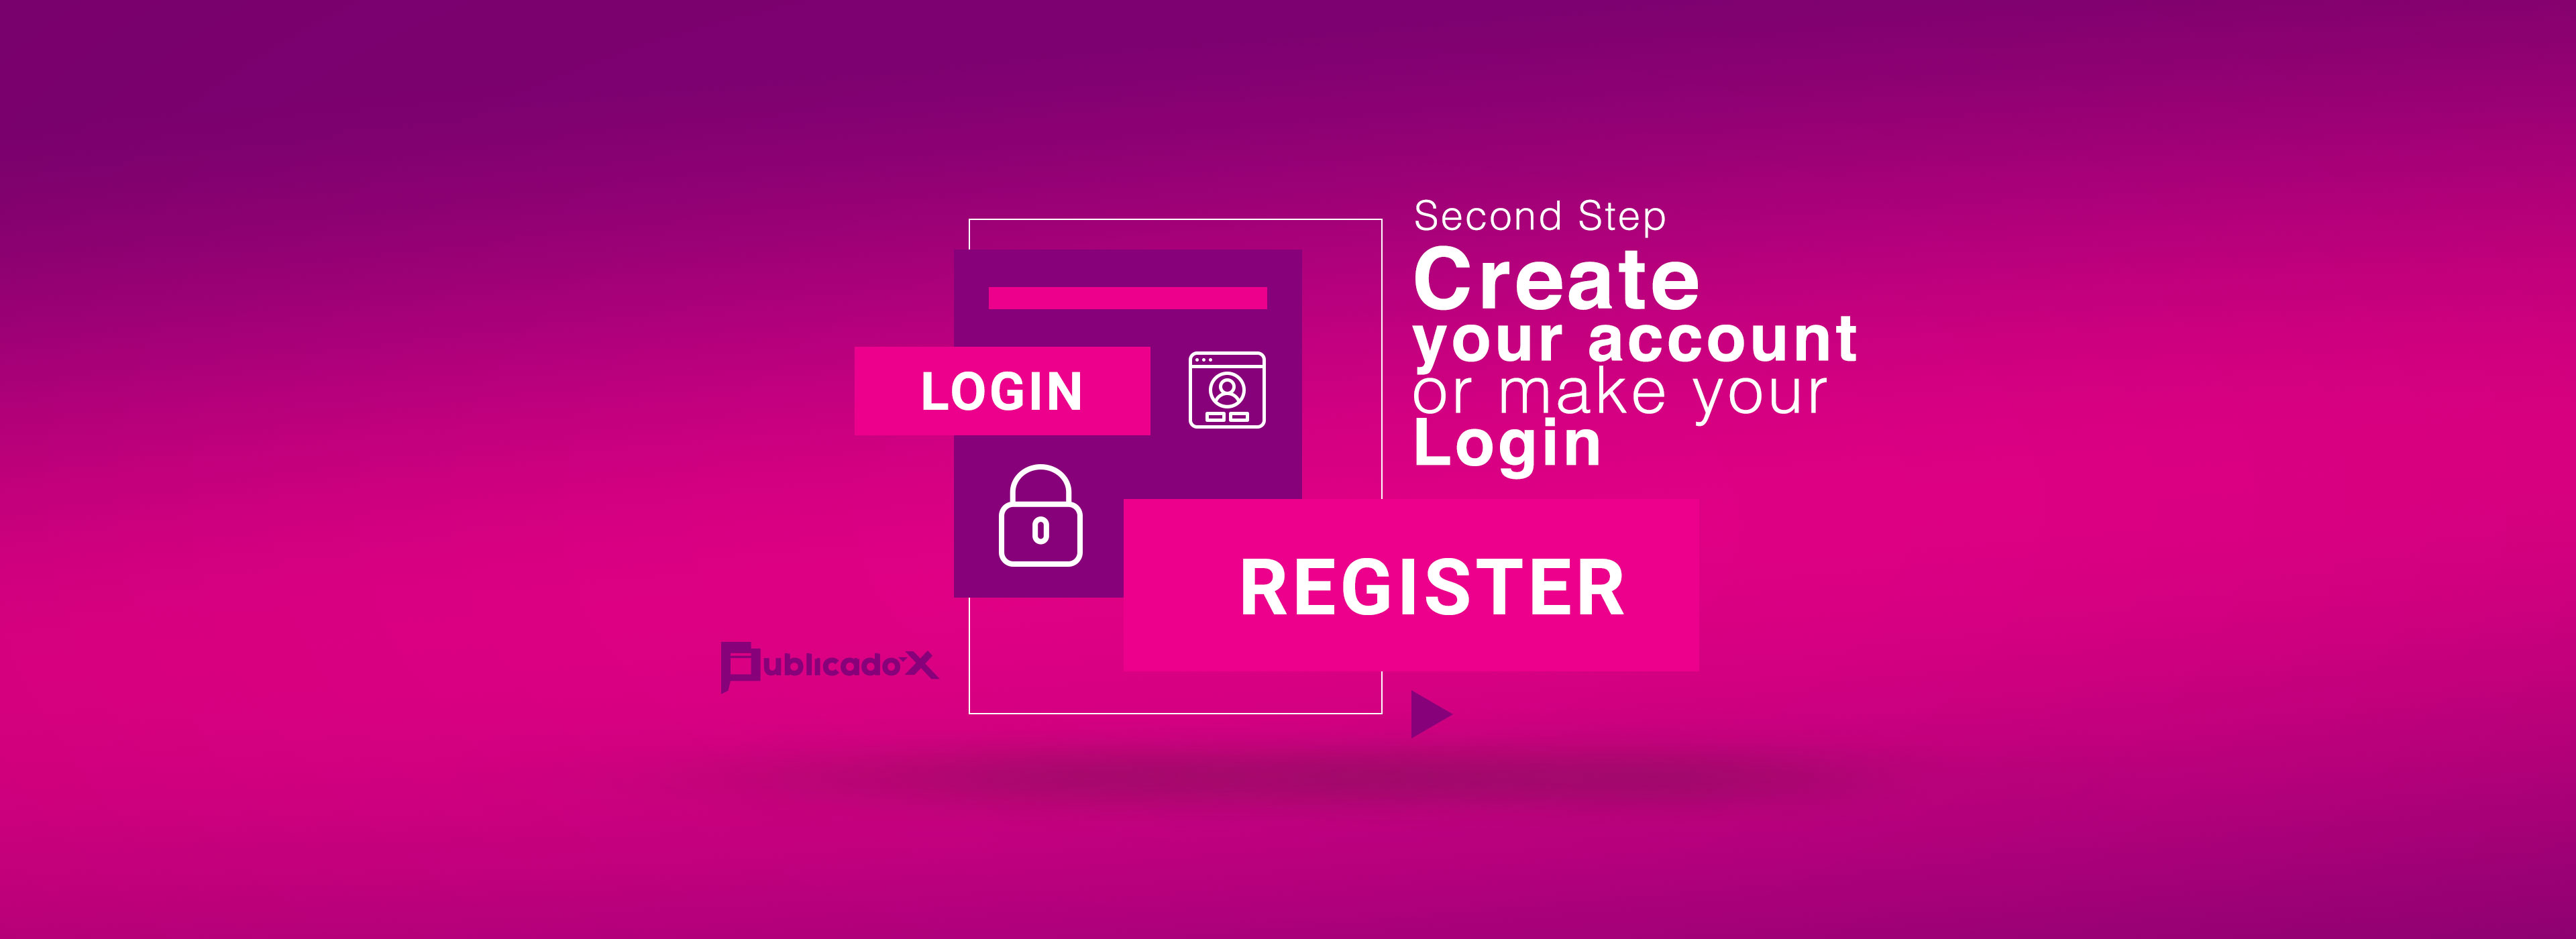 Step 2  Register your Account or Login if you already have your account registered.